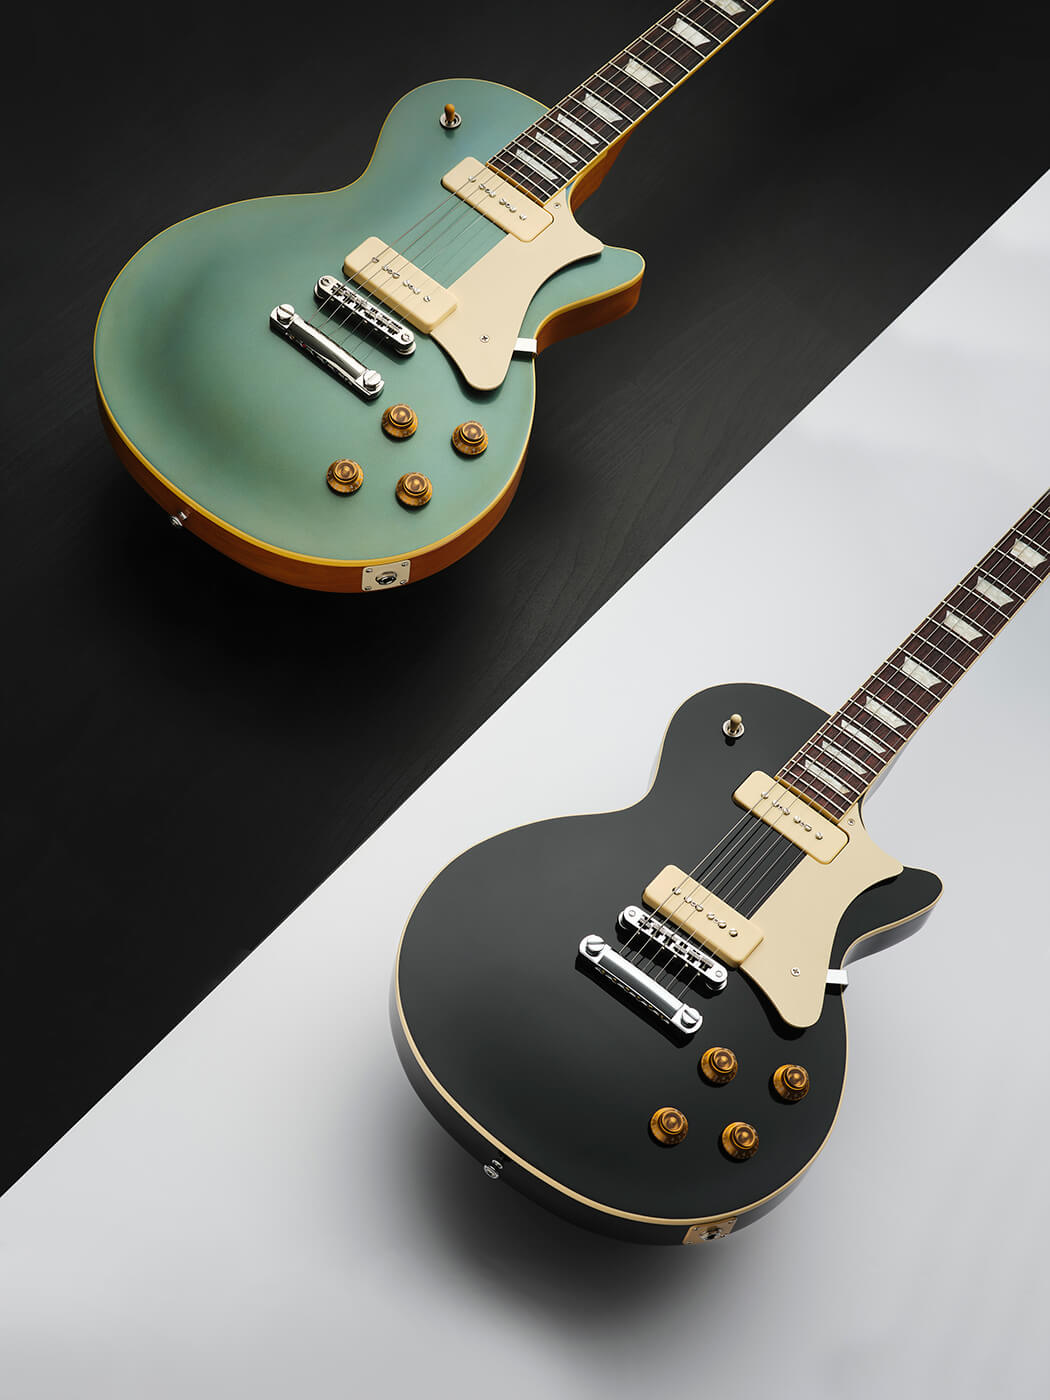 Heritage H-150 P90 Standard (black) and Custom Core (blue) by Adam Gasson